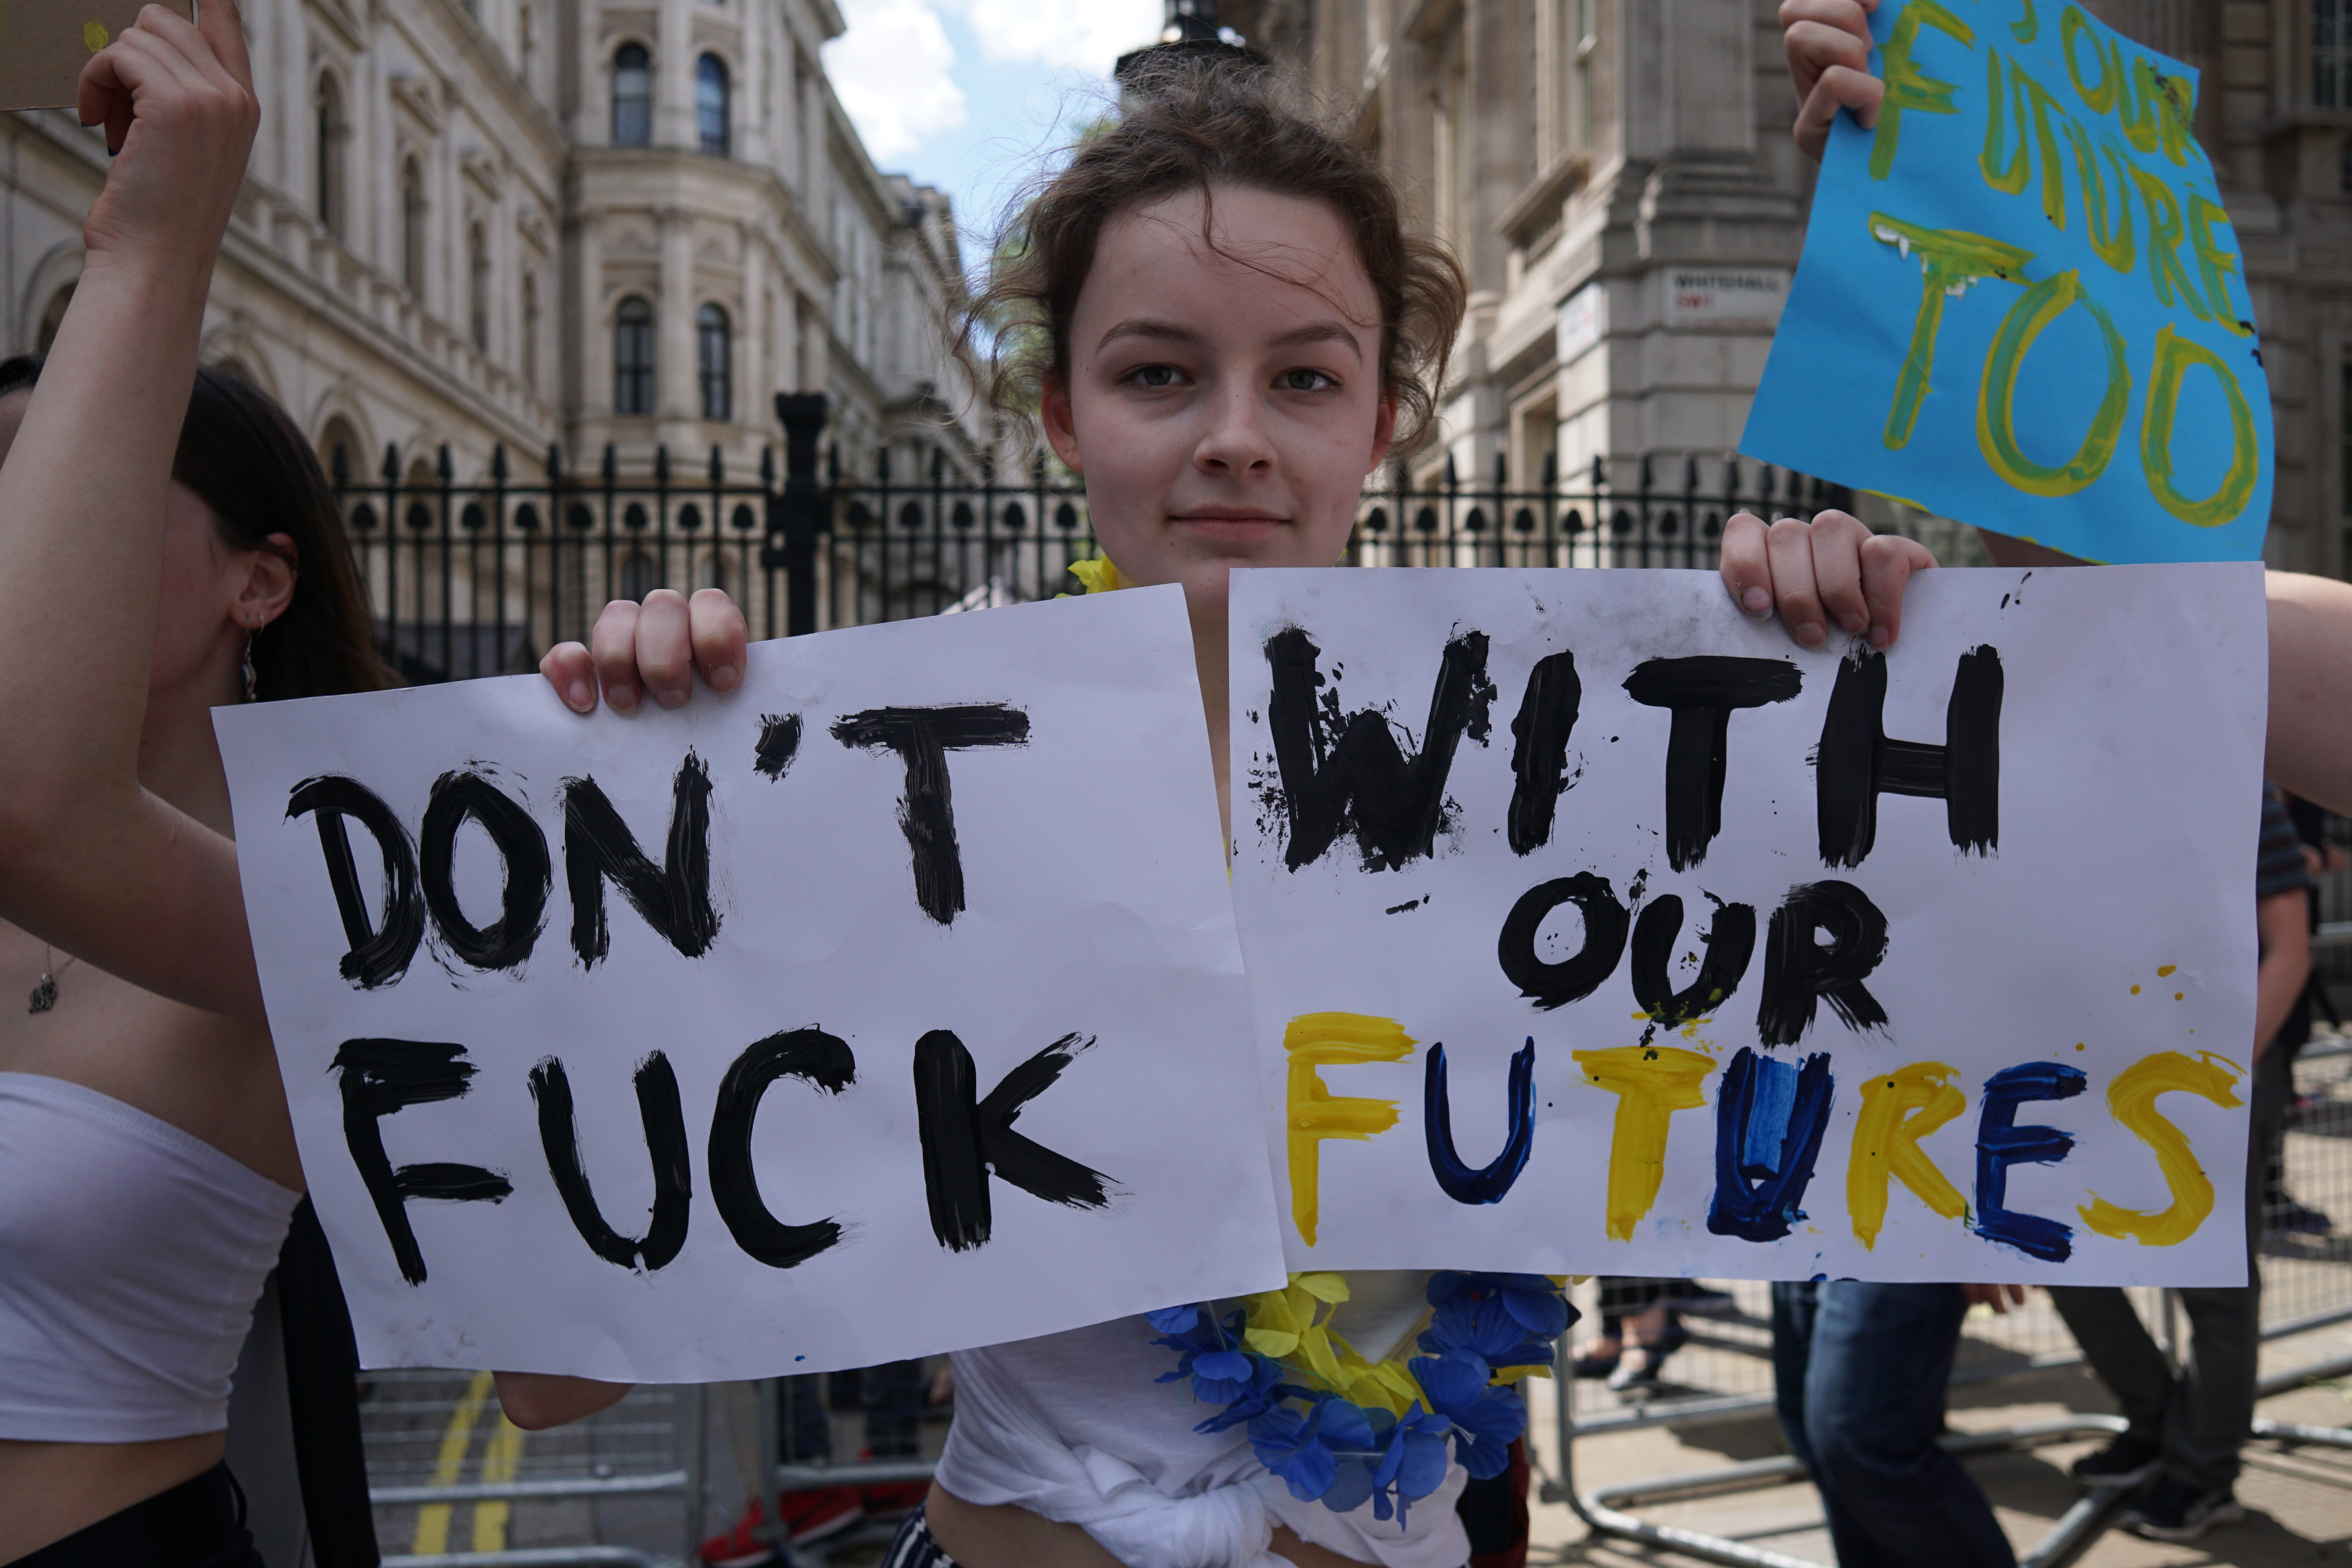 UNITED KINGDOM, London: A young woman holds placards as small group of teenagers protest against Brexit and demand the right to vote for 16 and 17 years old citizens, outside Downing Street, in London, on June 24, 2016, following Britain's referendum results to leave the European Union - See LI